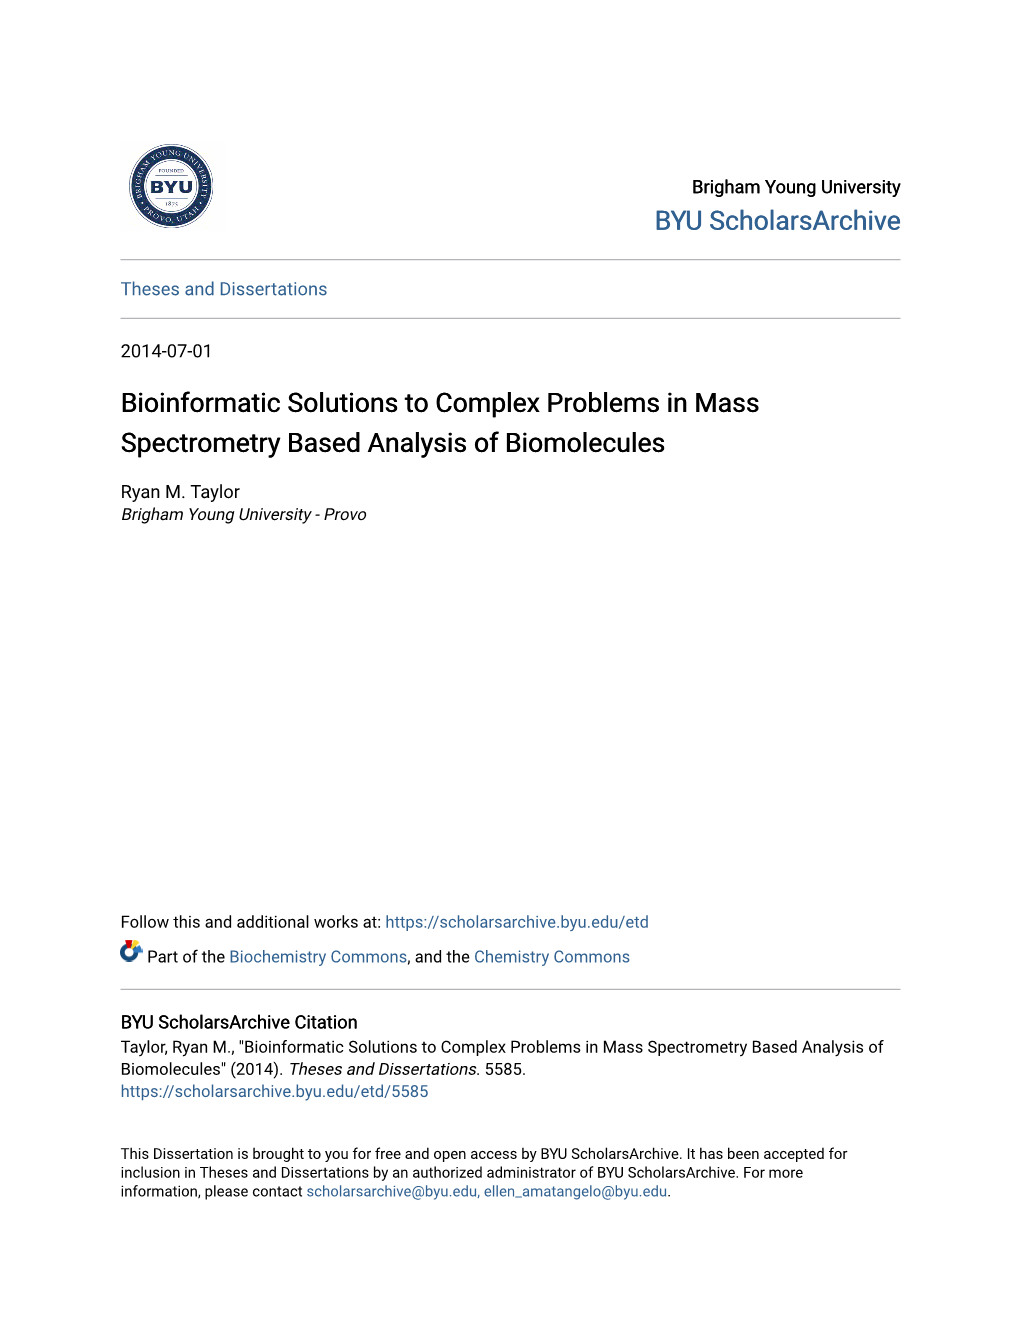 Bioinformatic Solutions to Complex Problems in Mass Spectrometry Based Analysis of Biomolecules